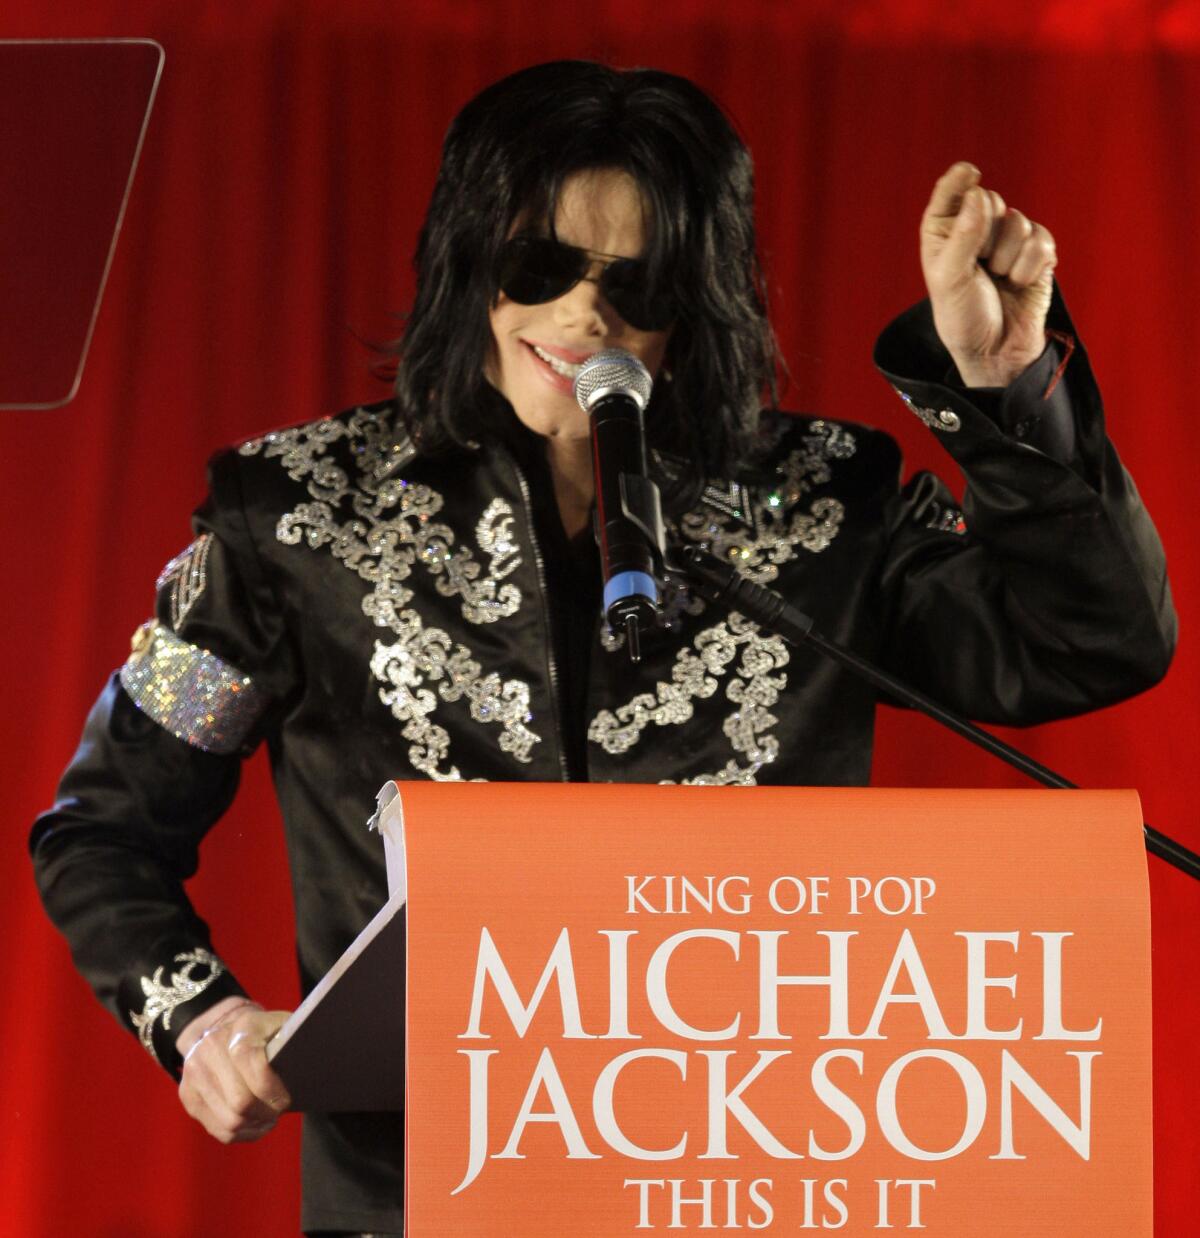 Michael Jackson announces several concerts at the London O2 Arena during a 2009 press conference.